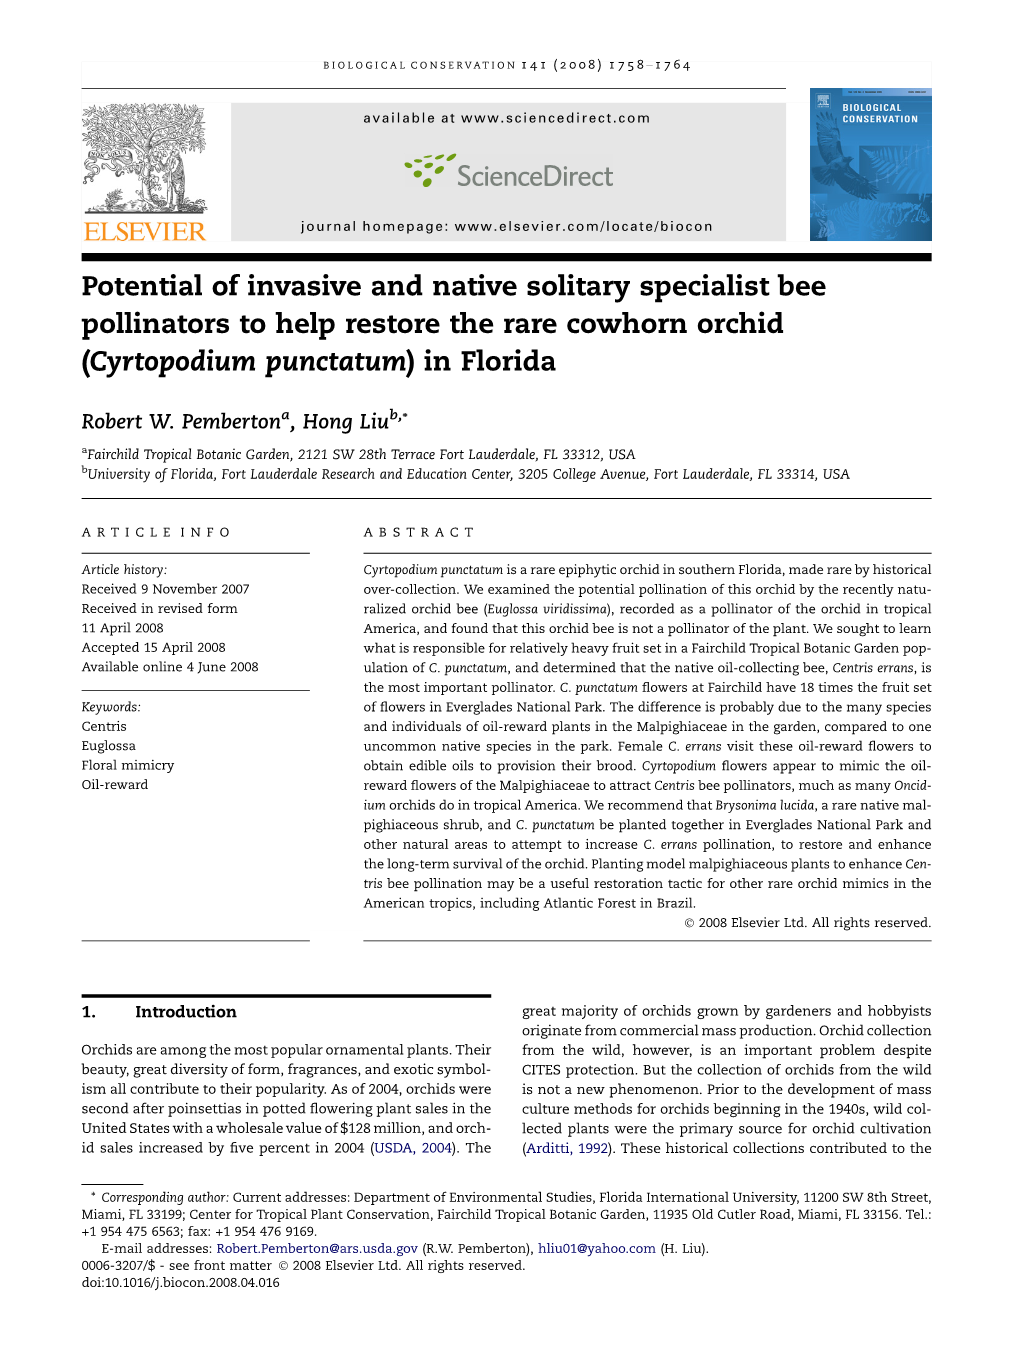 Potential of Invasive and Native Solitary Specialist Bee Pollinators to Help Restore the Rare Cowhorn Orchid (Cyrtopodium Punctatum) in Florida